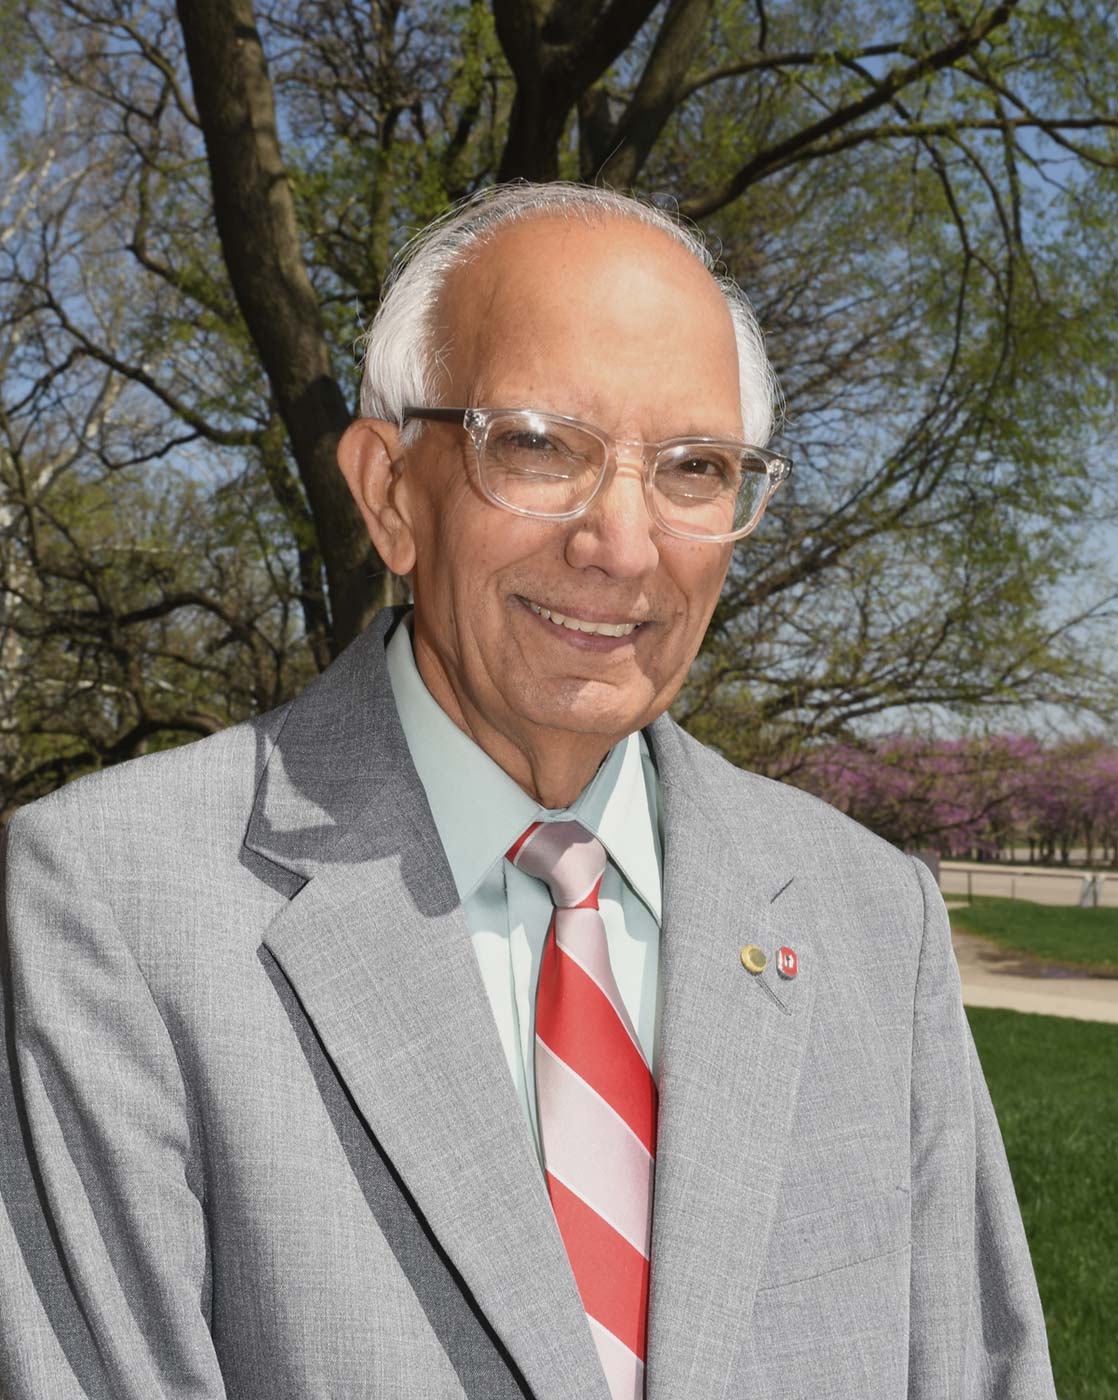 Dr. Lal has been based at Ohio State for the last 30 years. (Photo courtesy of Ohio State University / Ken Chamberlain)